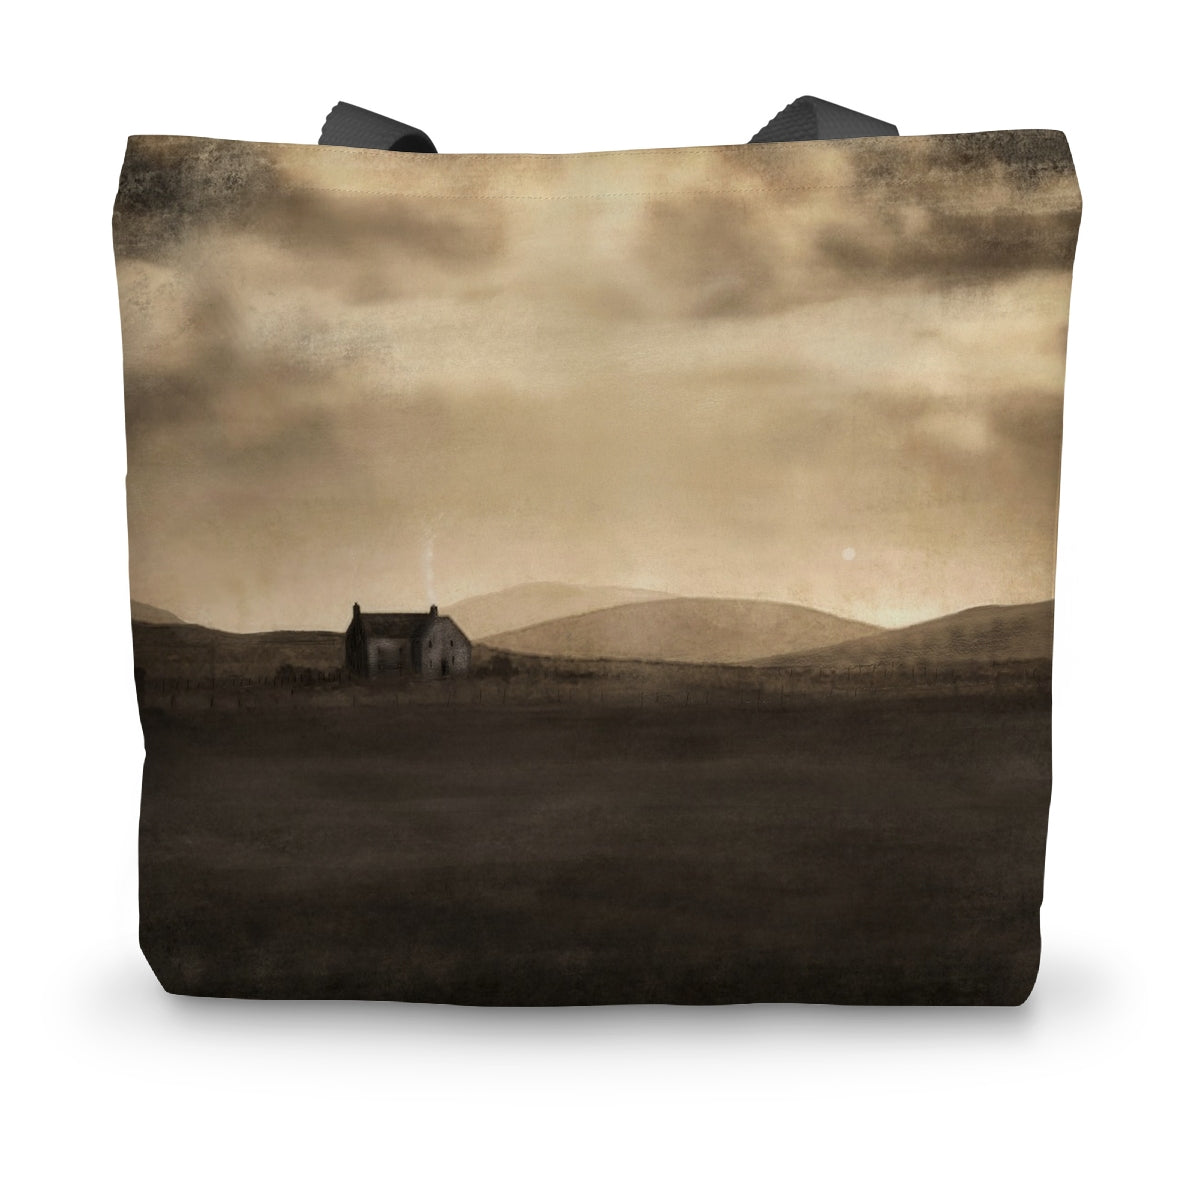 A Moonlit Croft Art Gifts Canvas Tote Bag-Bags-Hebridean Islands Art Gallery-14"x18.5"-Paintings, Prints, Homeware, Art Gifts From Scotland By Scottish Artist Kevin Hunter